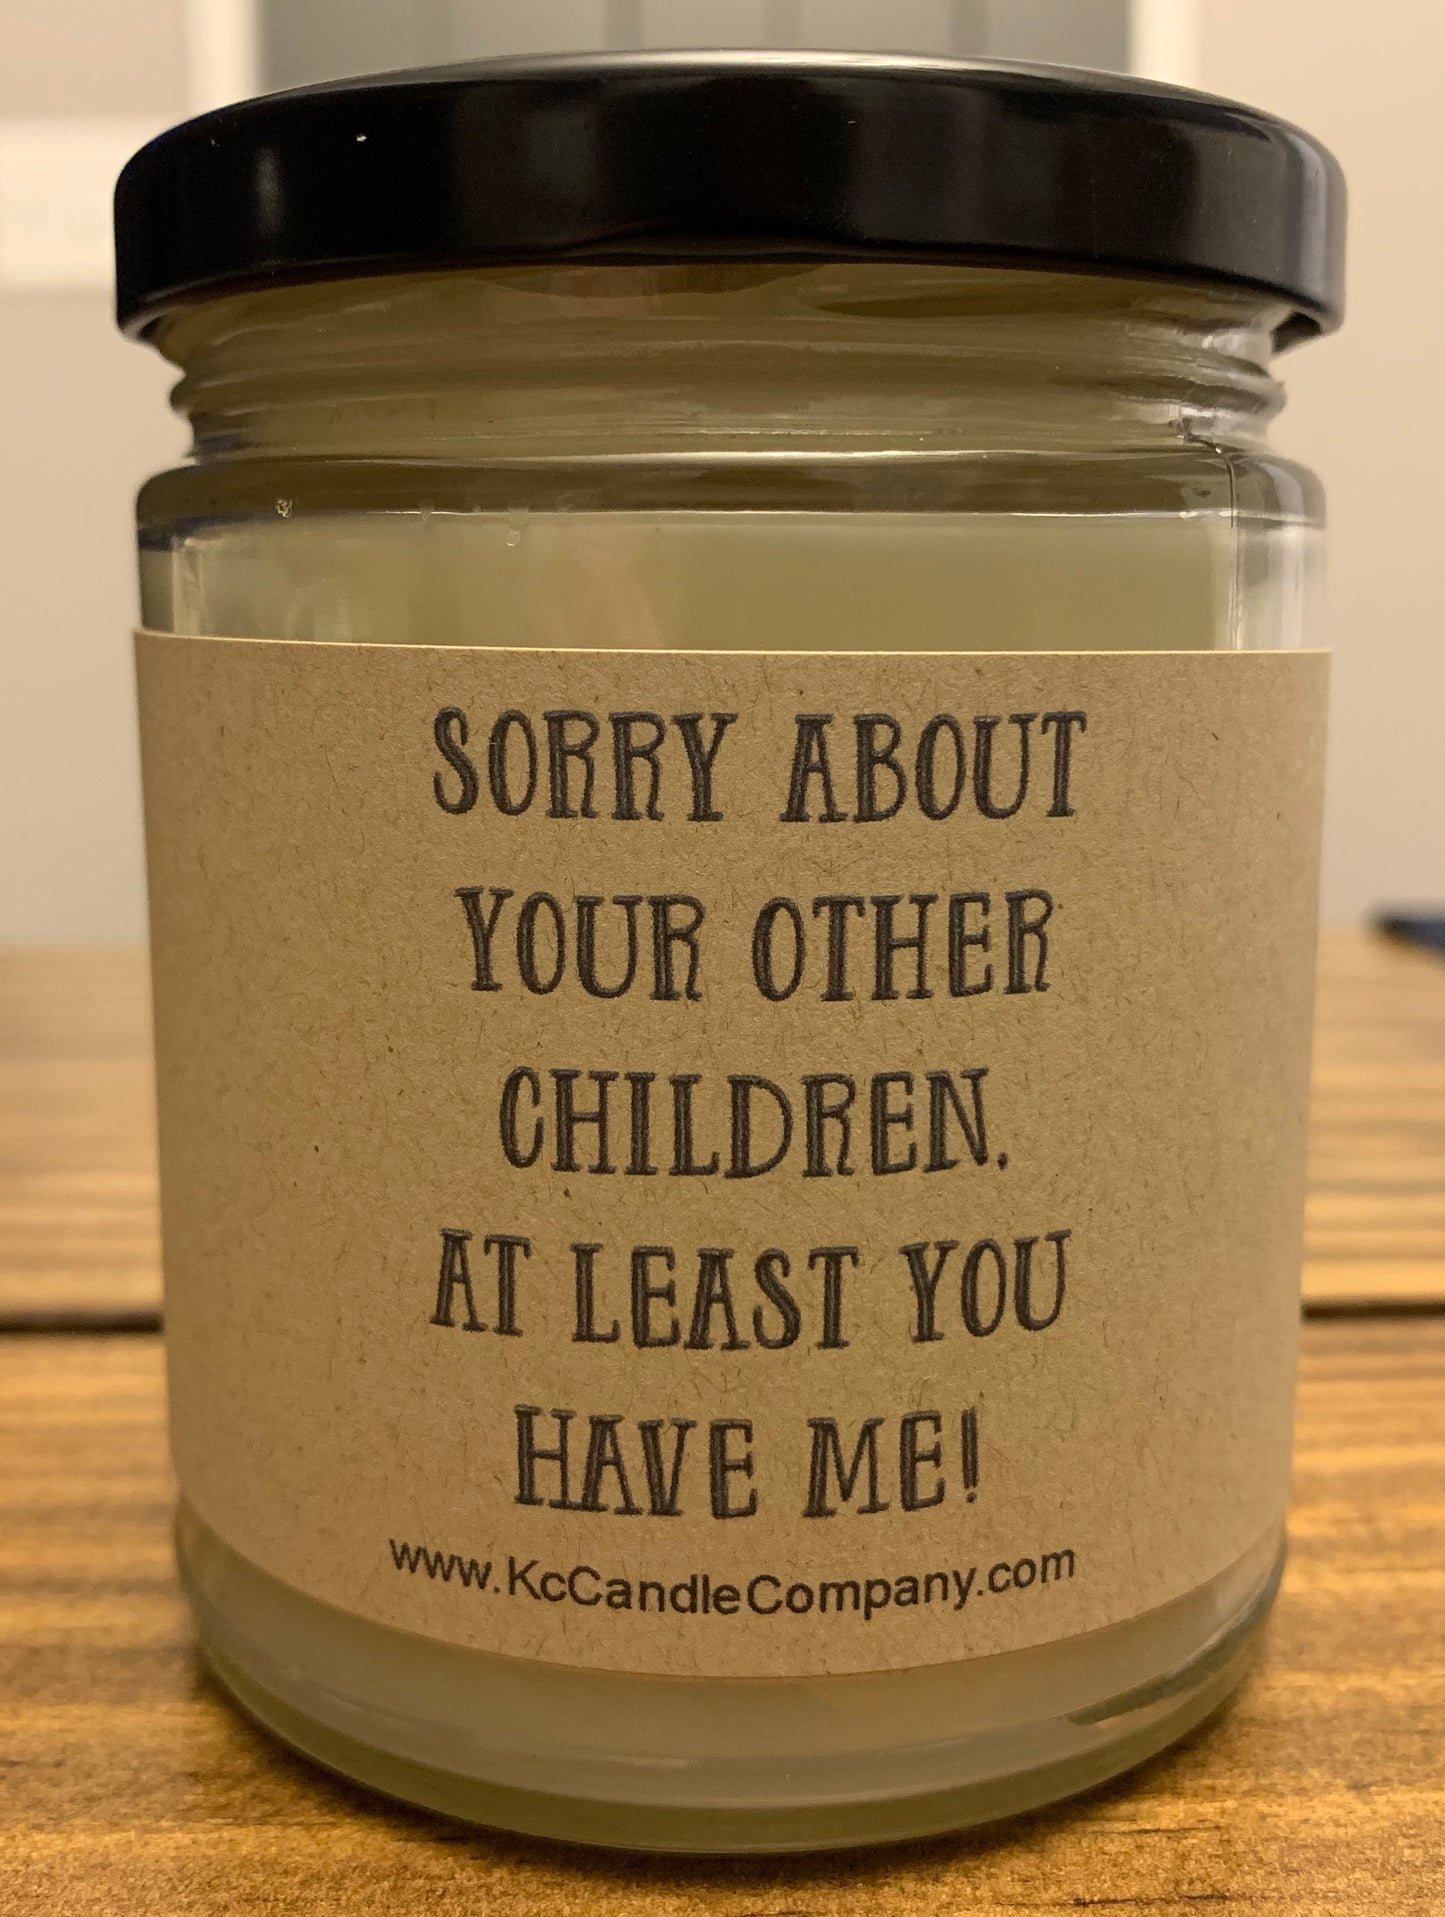 Sorry About Your Other Children - At Least You Have Me